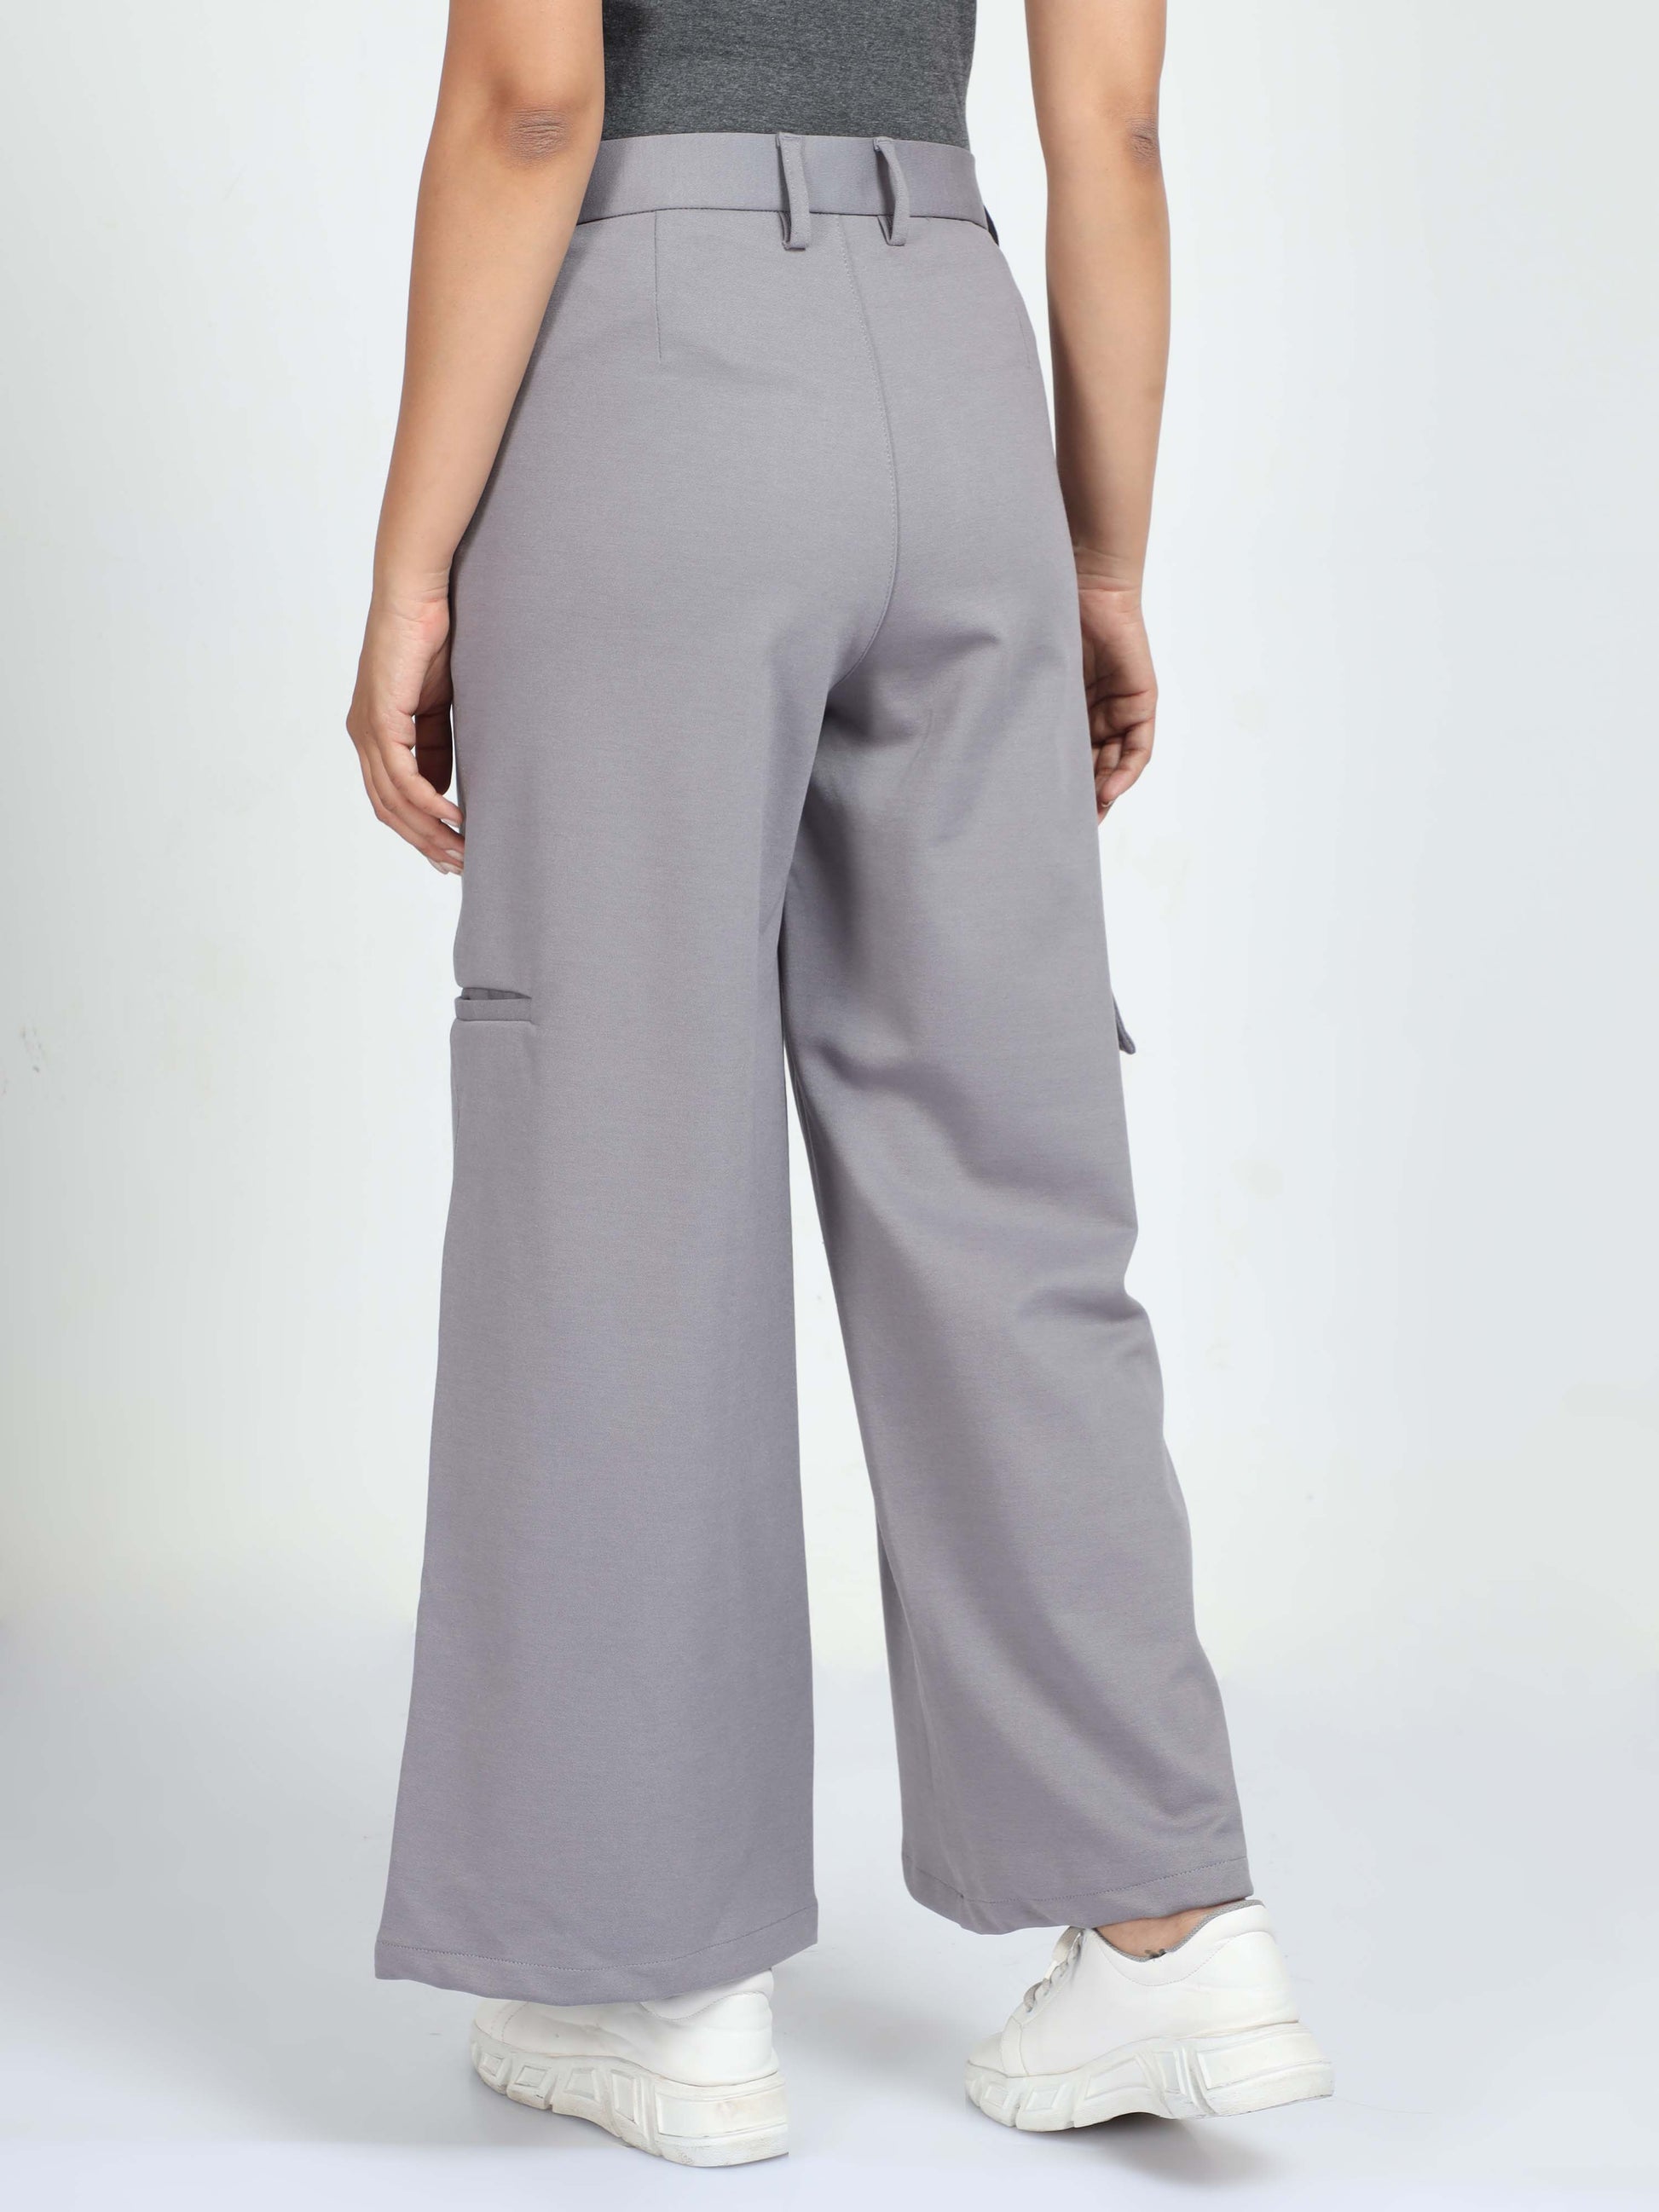 Buy latest Ash womens flared trousers online in india – Marquee